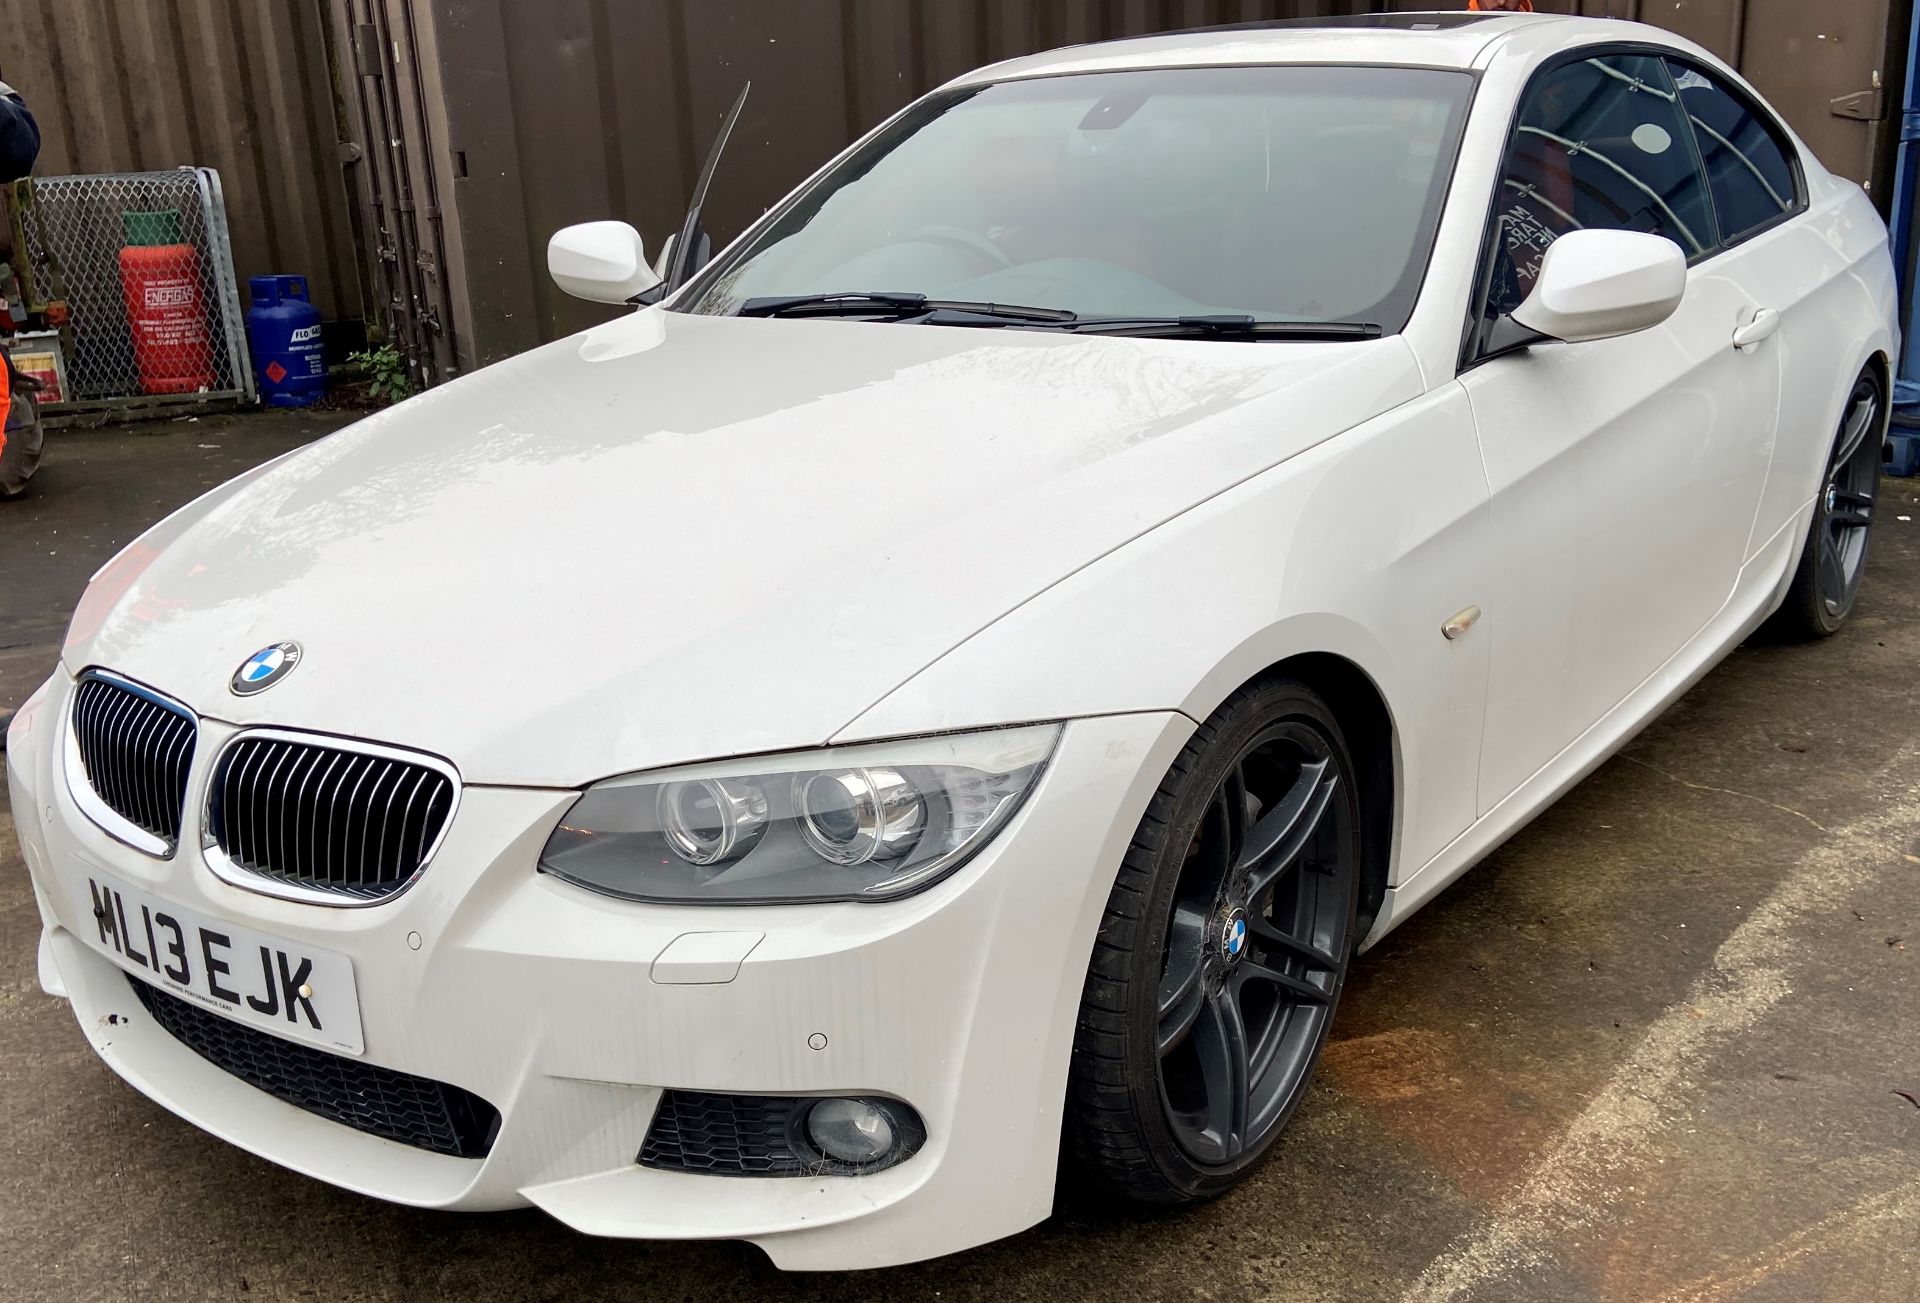 BMW 3.0 335DM Sport Automatic Coupe - diesel - white - black alloys and red leather interior.